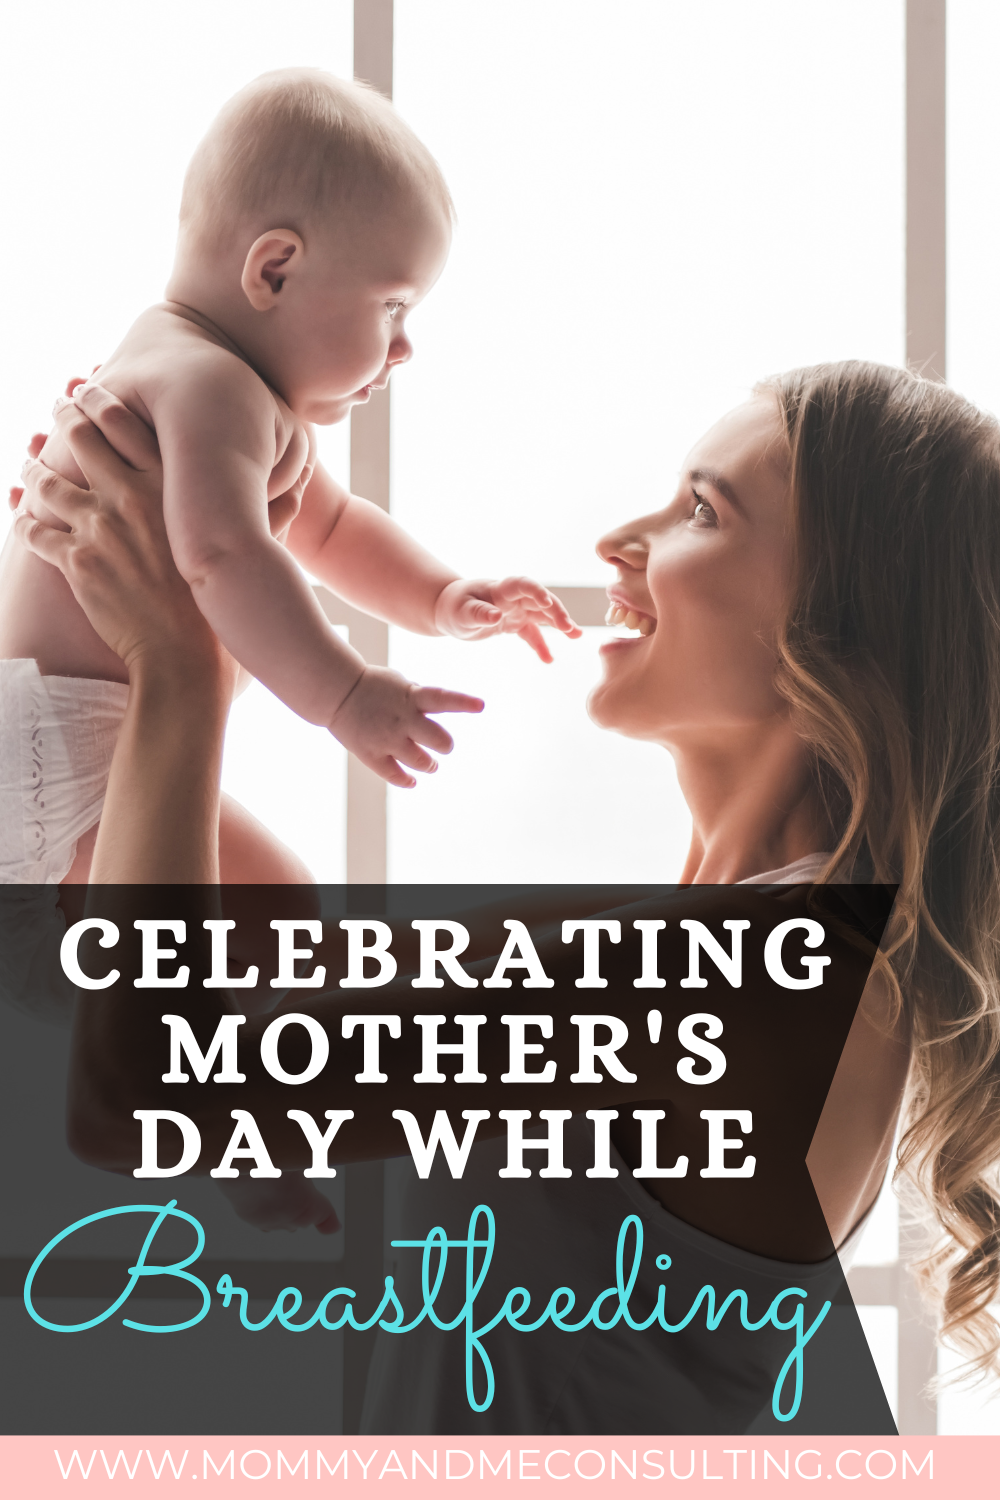 Celebrating Mother's Day While Breastfeeding